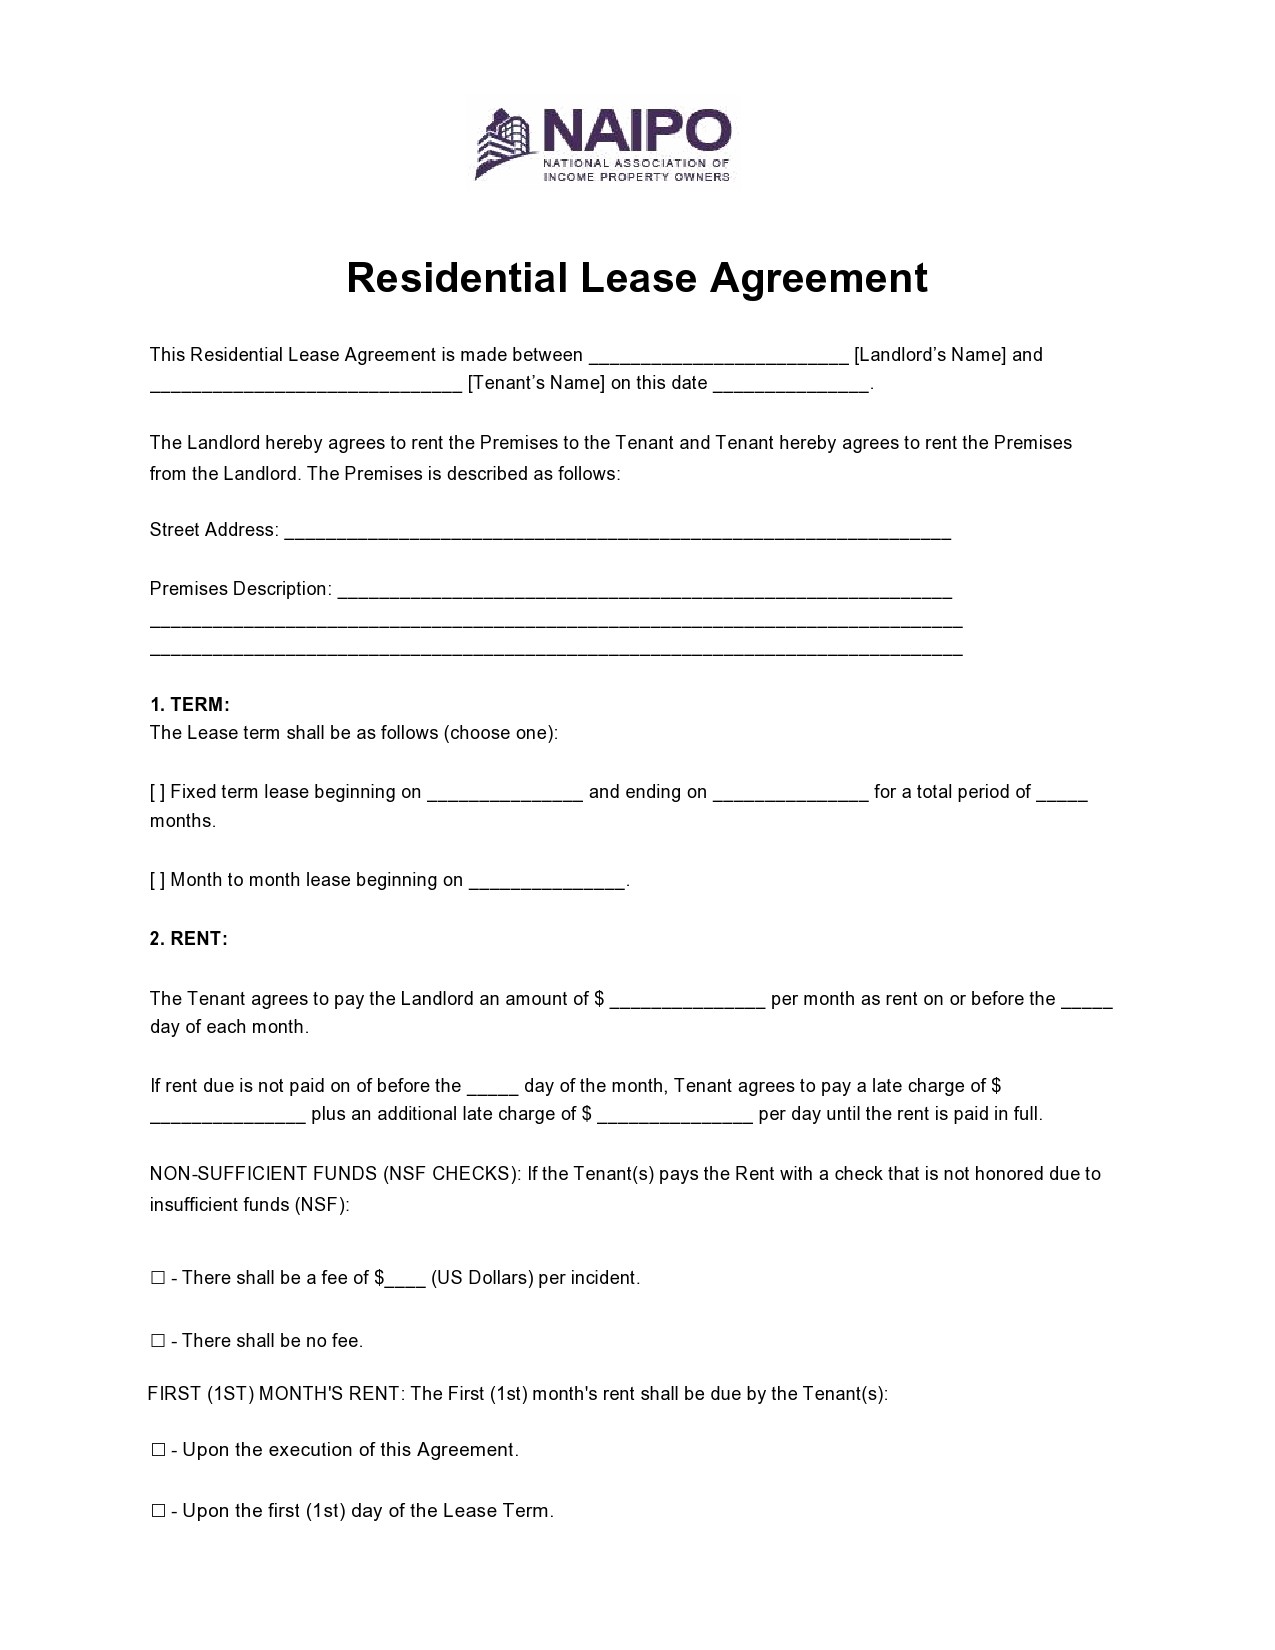 Free residential lease agreement 06